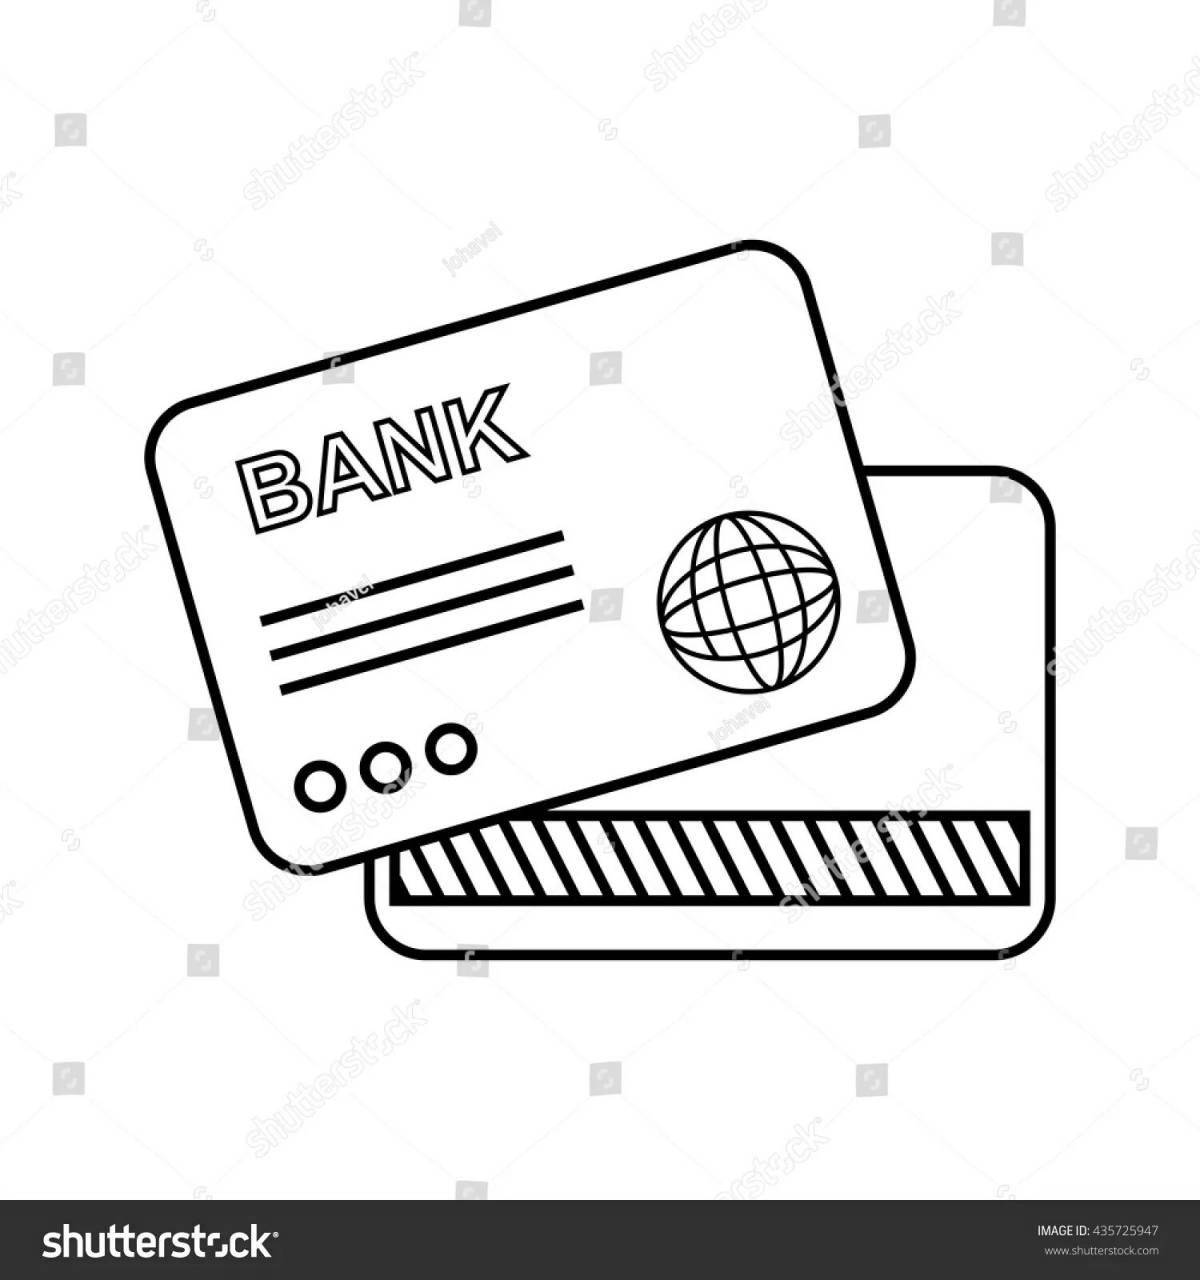 Gorgeous bank card coloring page